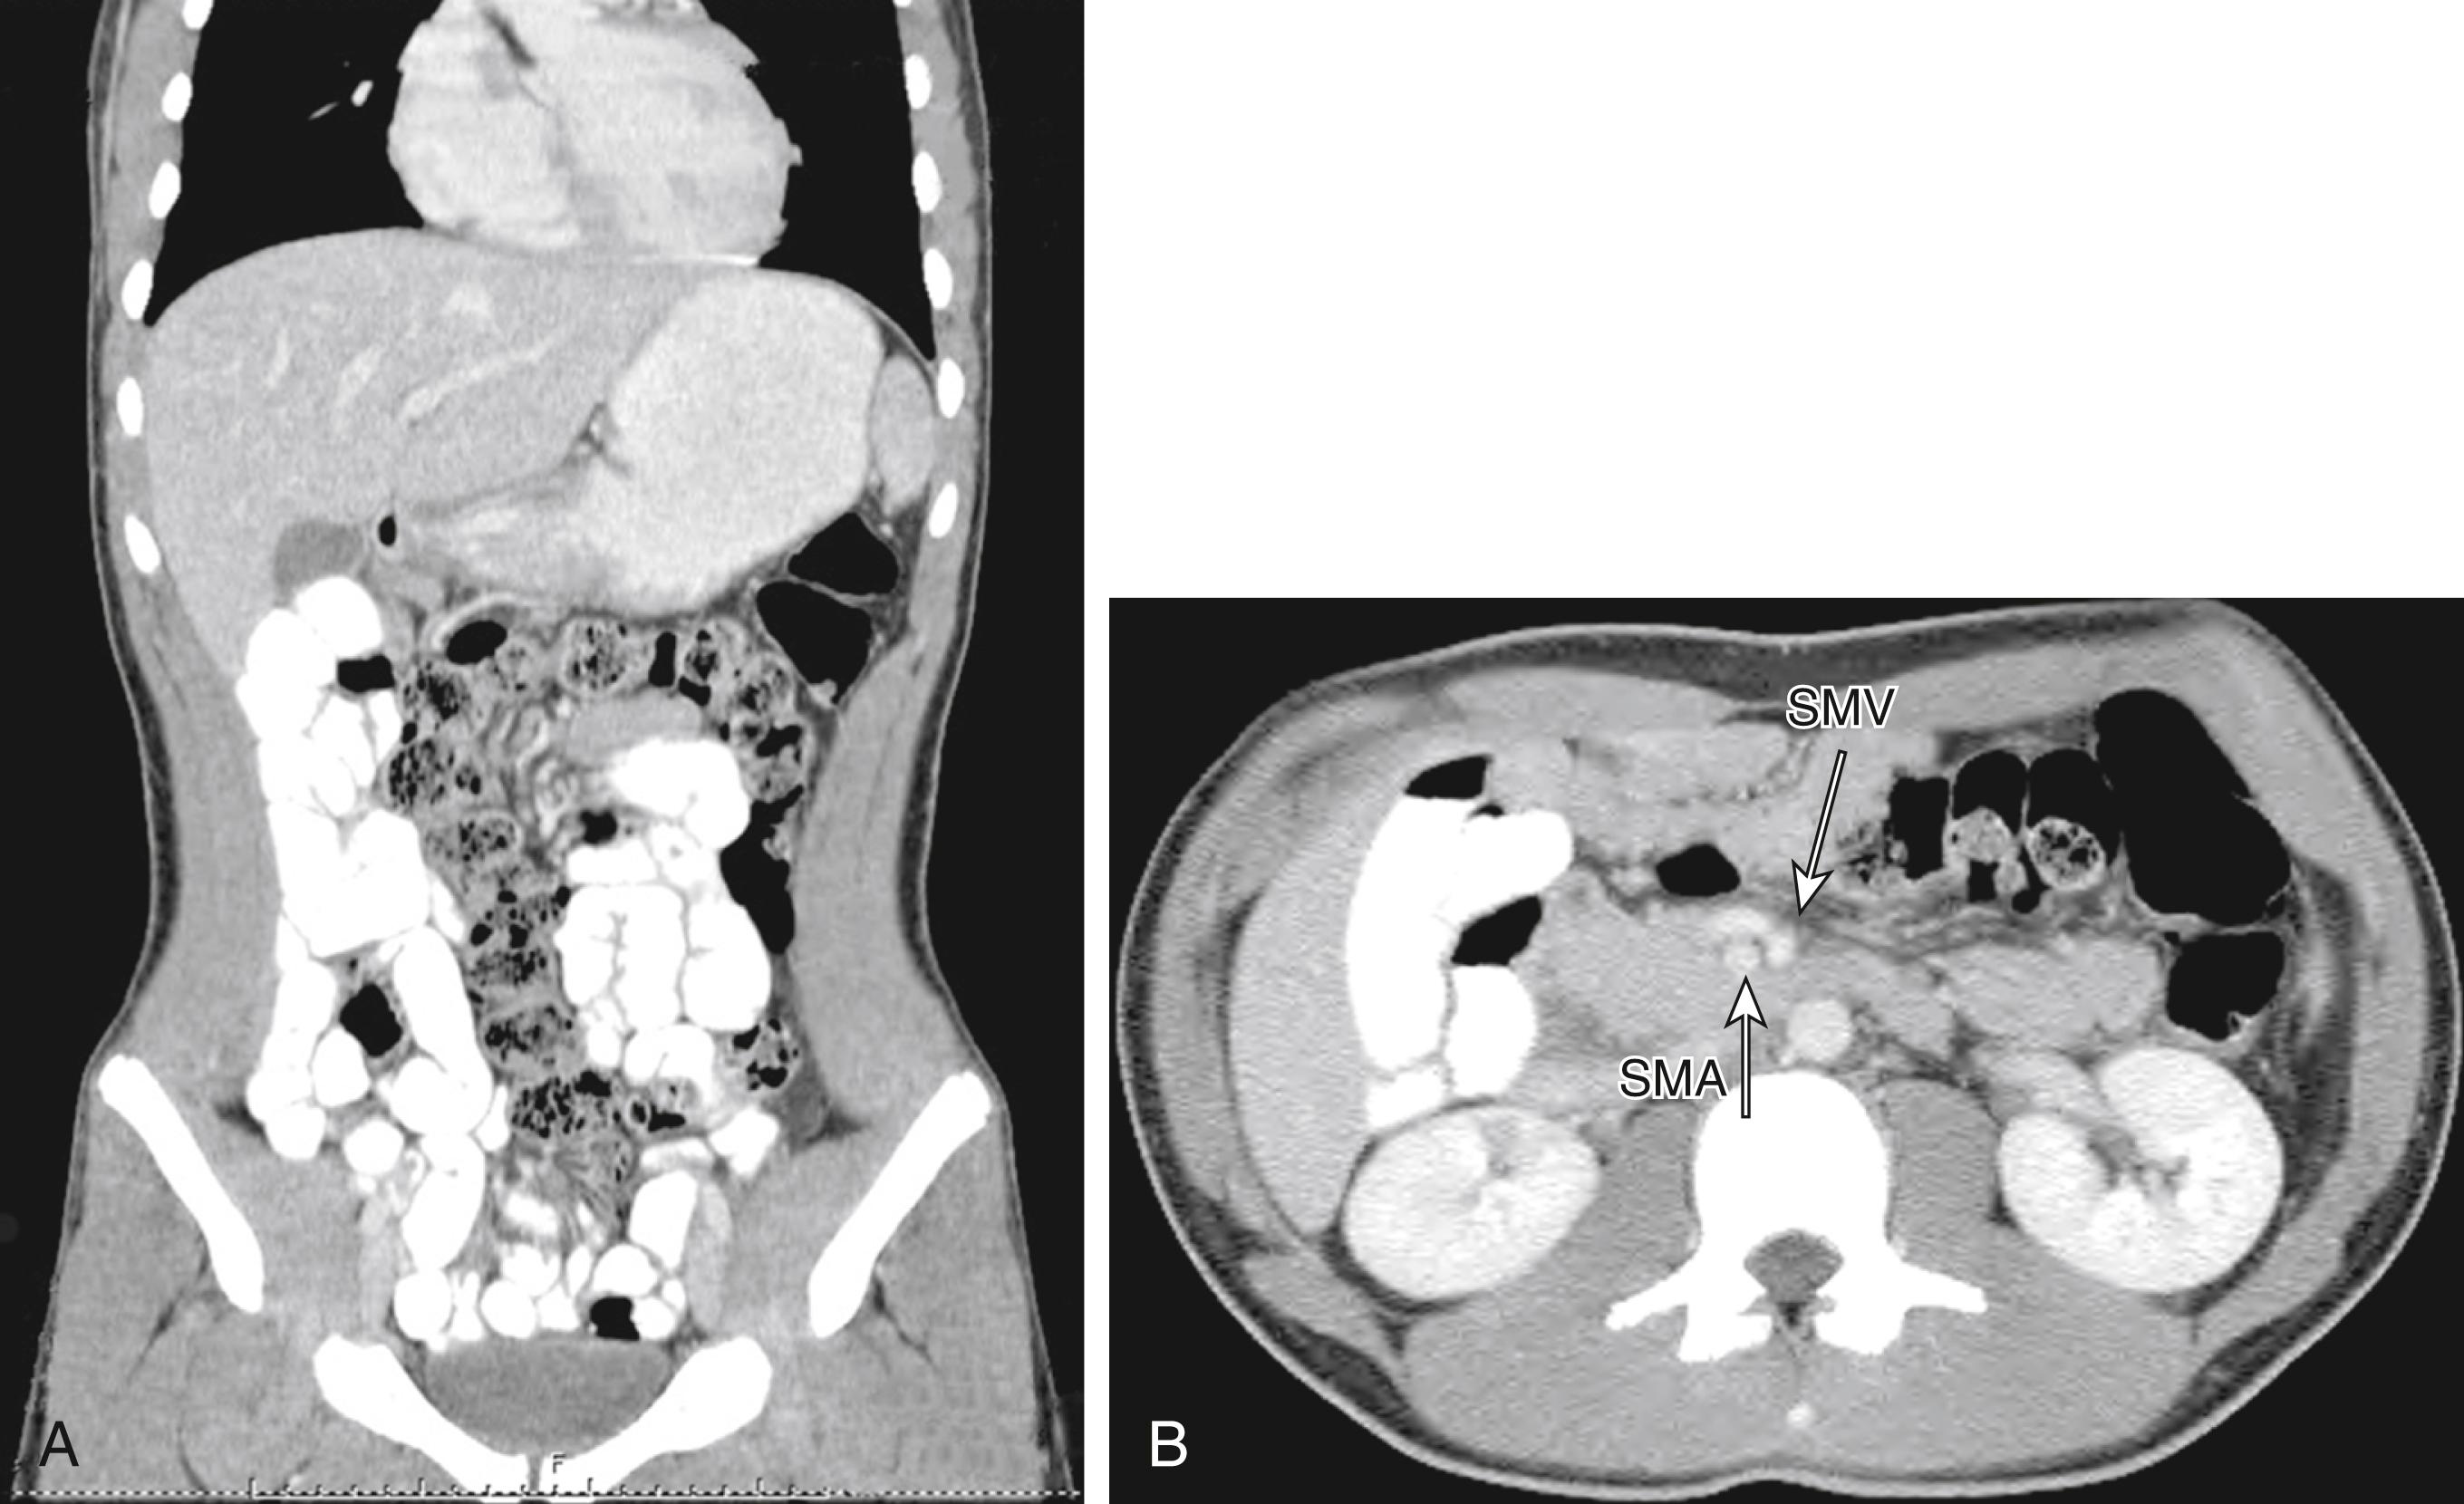 Fig. 7-3, This 15-year-old patient presented with chronic abdominal pain and underwent a computed tomography scan for diagnosis. A, On the sagittal view, the small bowel is filled with contrast and is located along the right paracolic gutter. B, On coronal section, note that the superior mesenteric artery (SMA) and superior mesenteric vein (SMV) are mispositioned and are reversed in orientation to each other. This patient underwent a laparoscopic Ladd procedure with resolution of her symptoms.